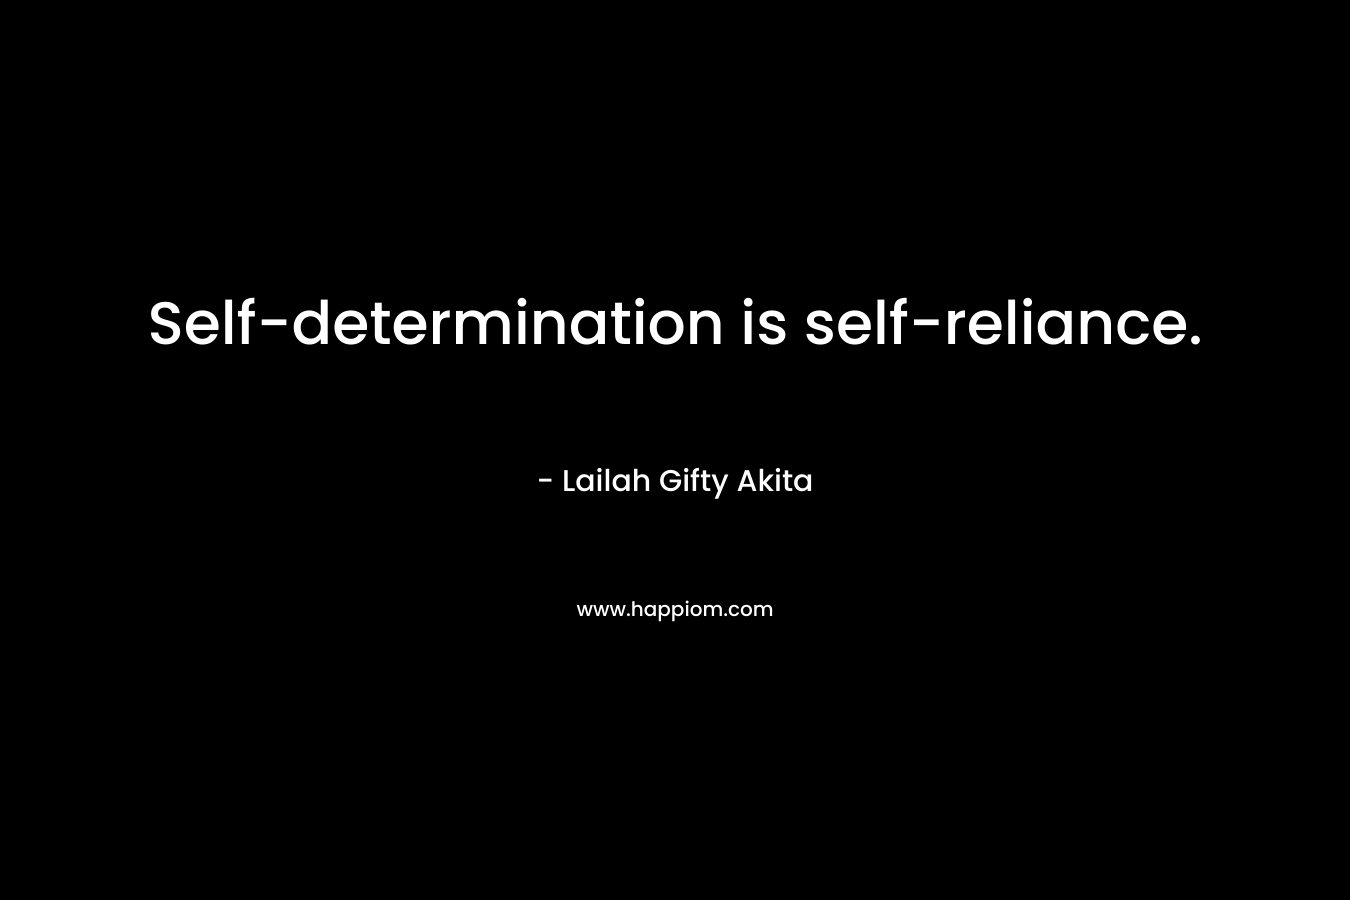 Self-determination is self-reliance. – Lailah Gifty Akita